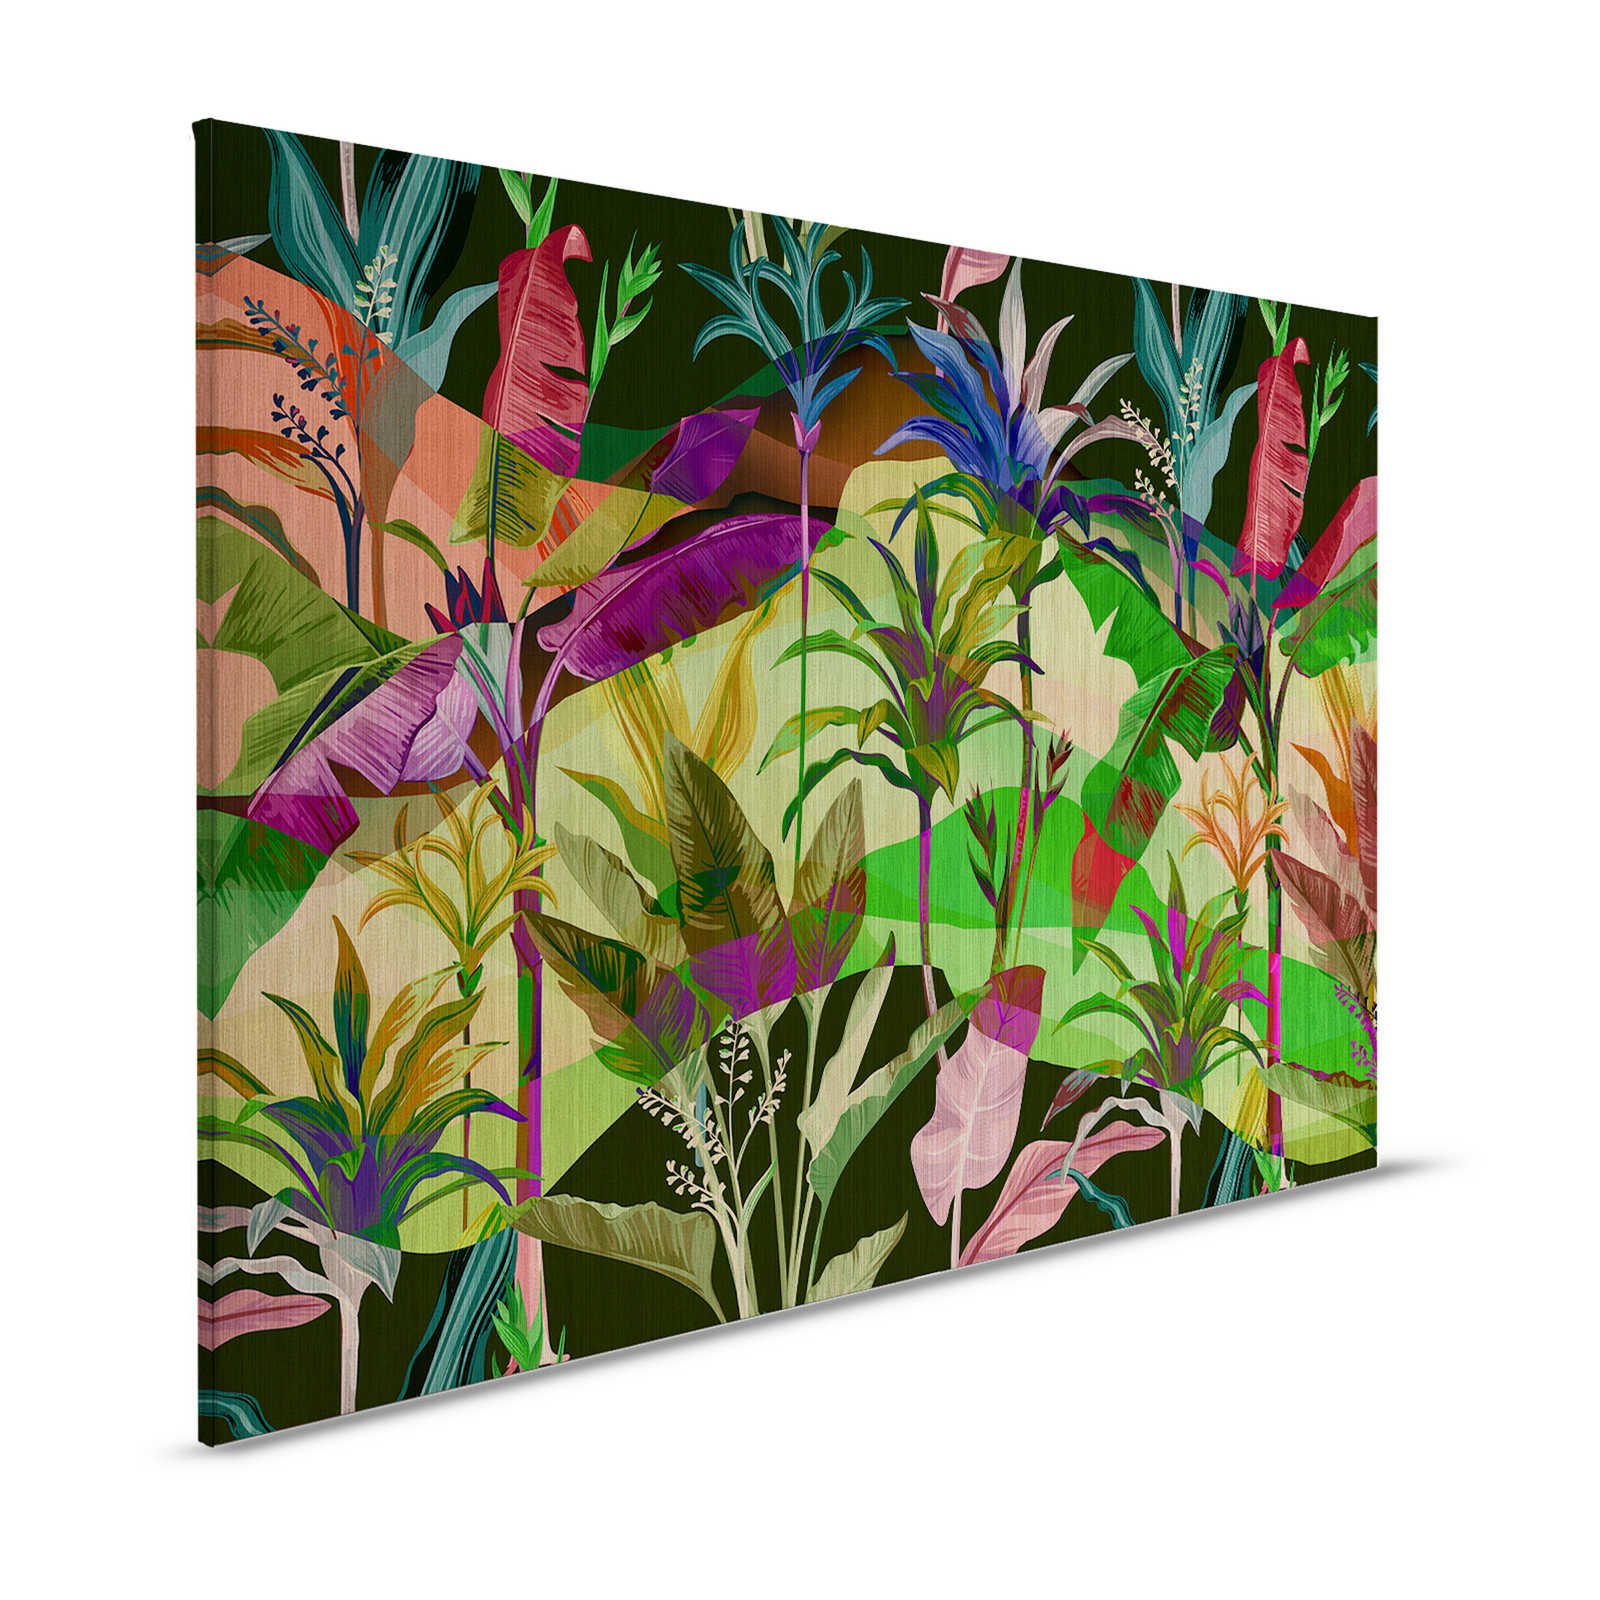 Palmyra 2 - Canvas painting Jungle leaves colourful design - 1,20 m x 0,80 m
